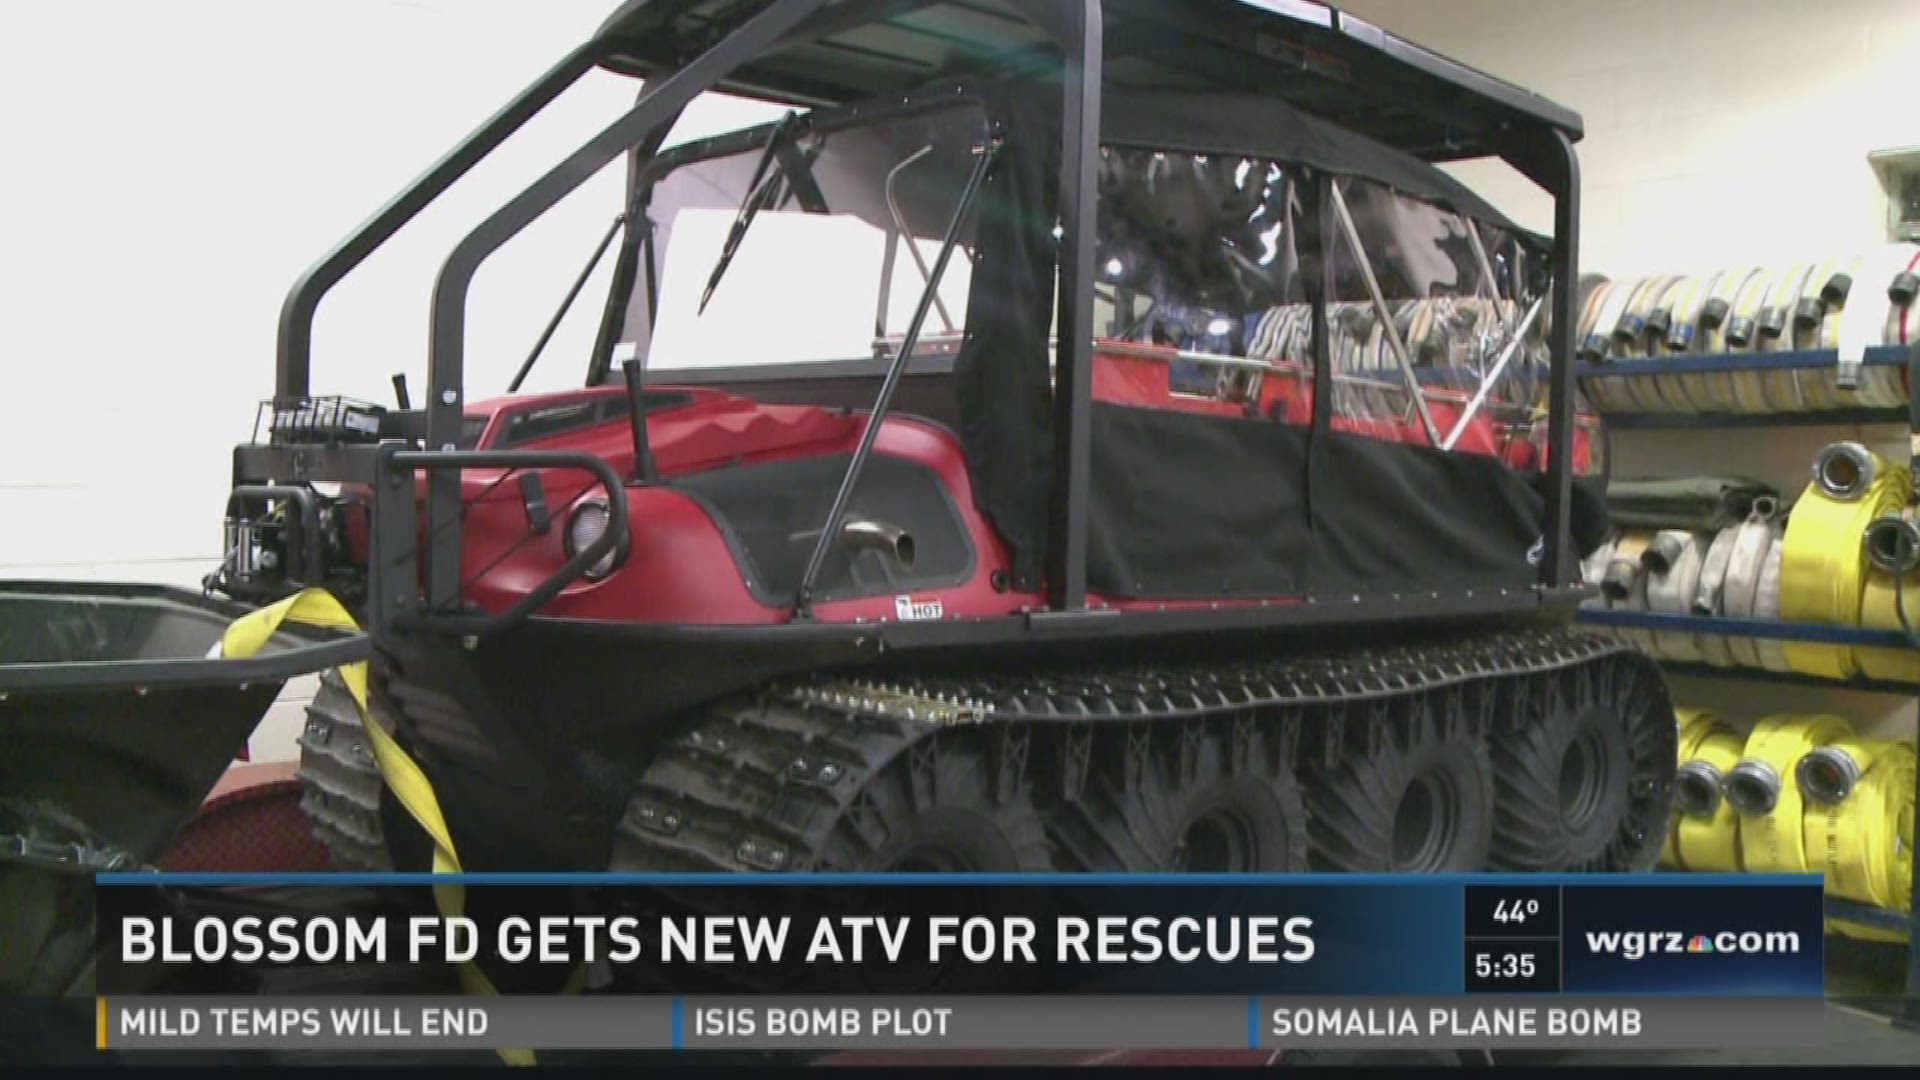 Blossom FD Gets New ATV For Rescues